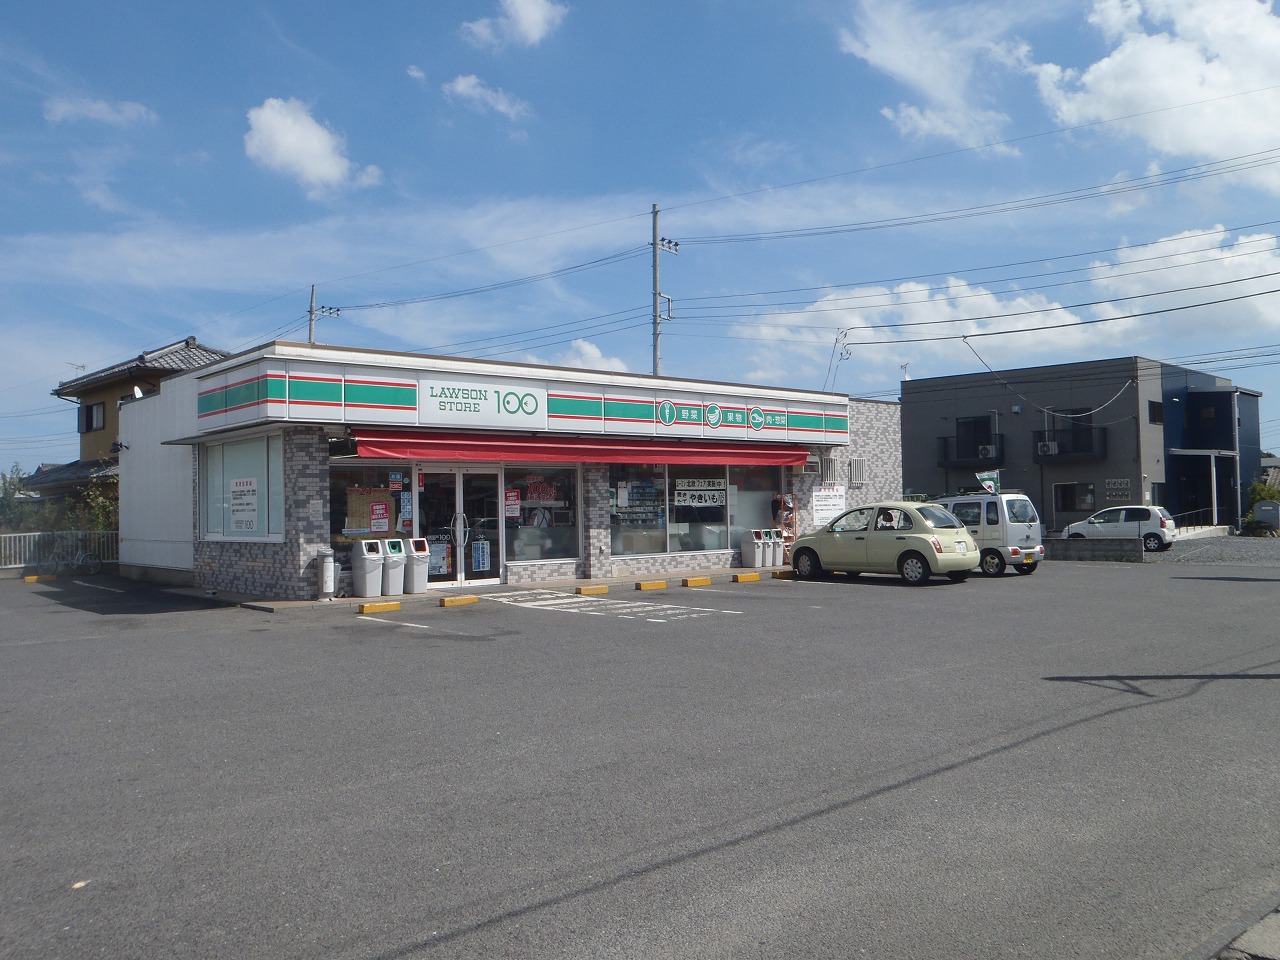 Convenience store. STORE100 Ohira store (convenience store) to 680m